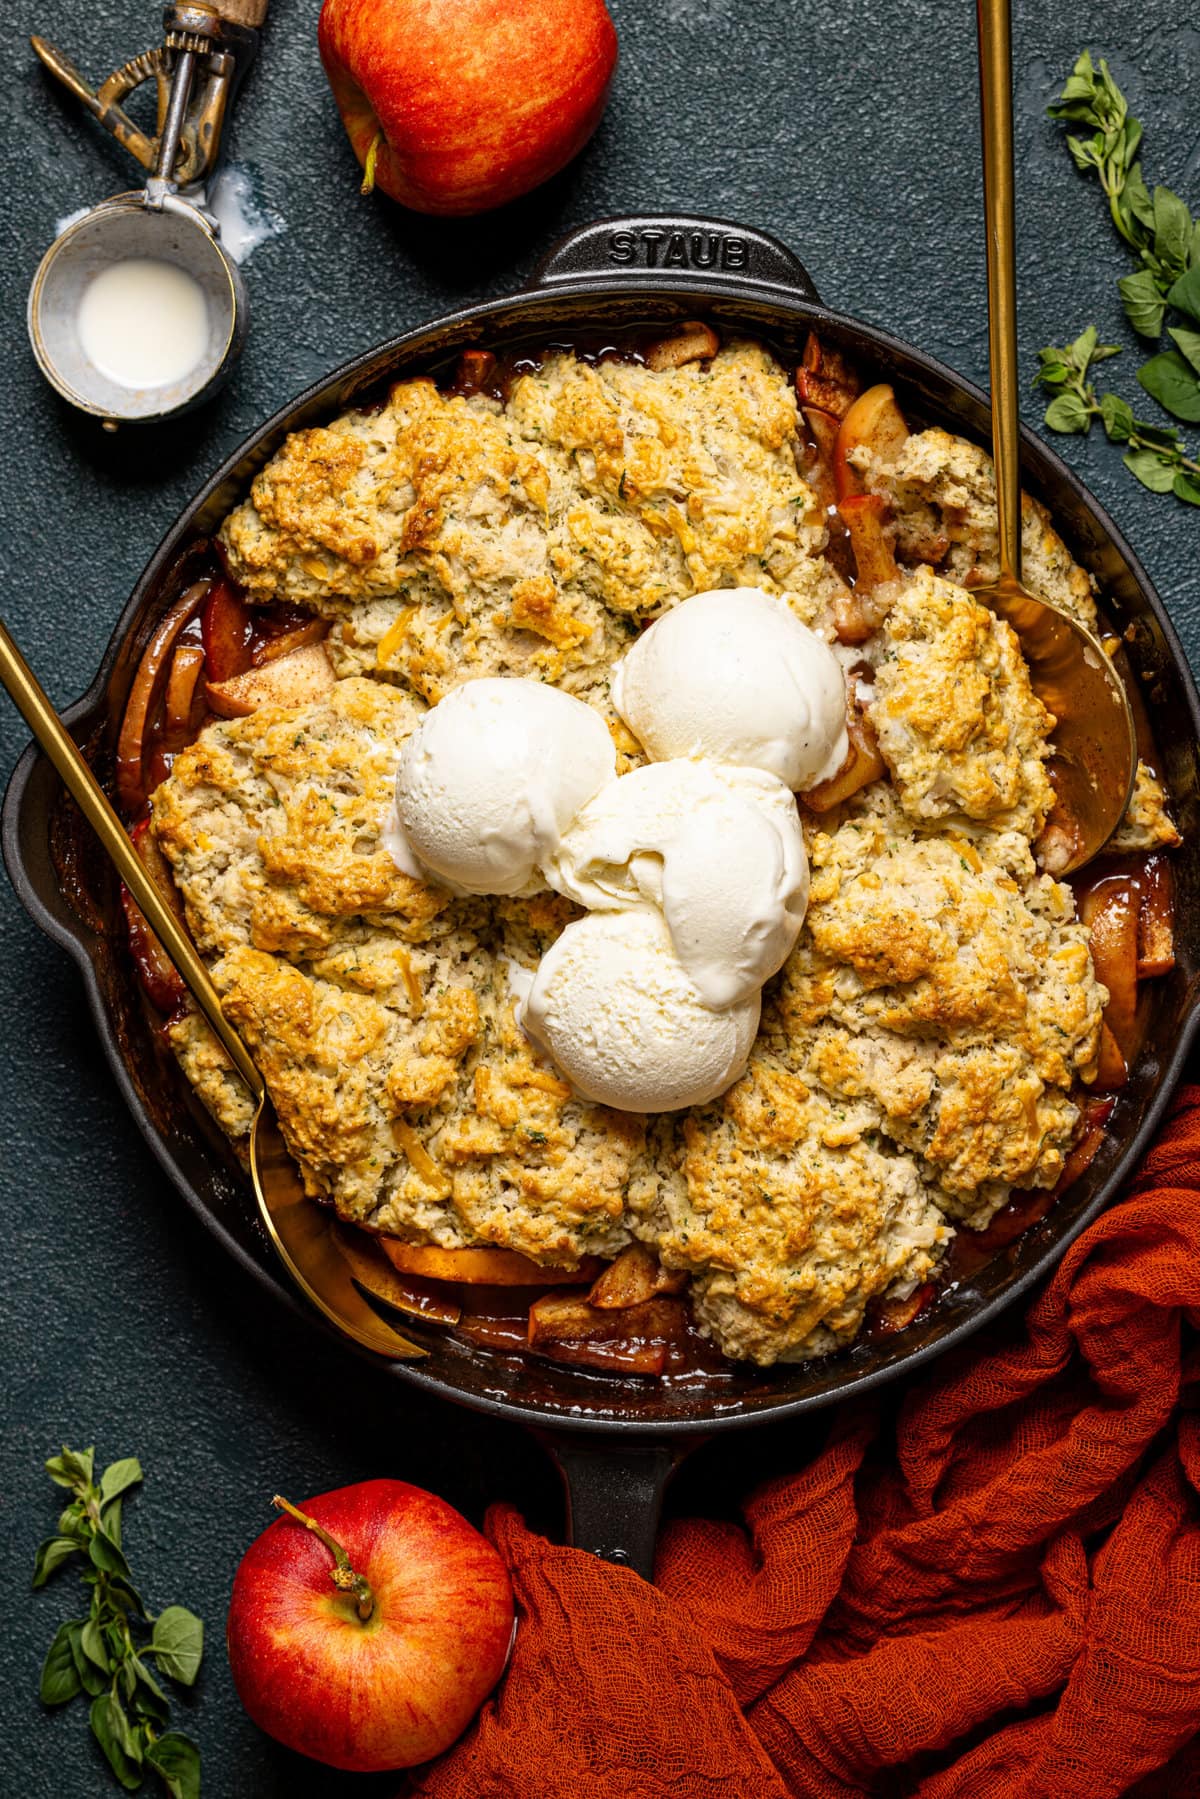 Baked cobbler in a skillet with two serving spoons and scoops of ice cream.